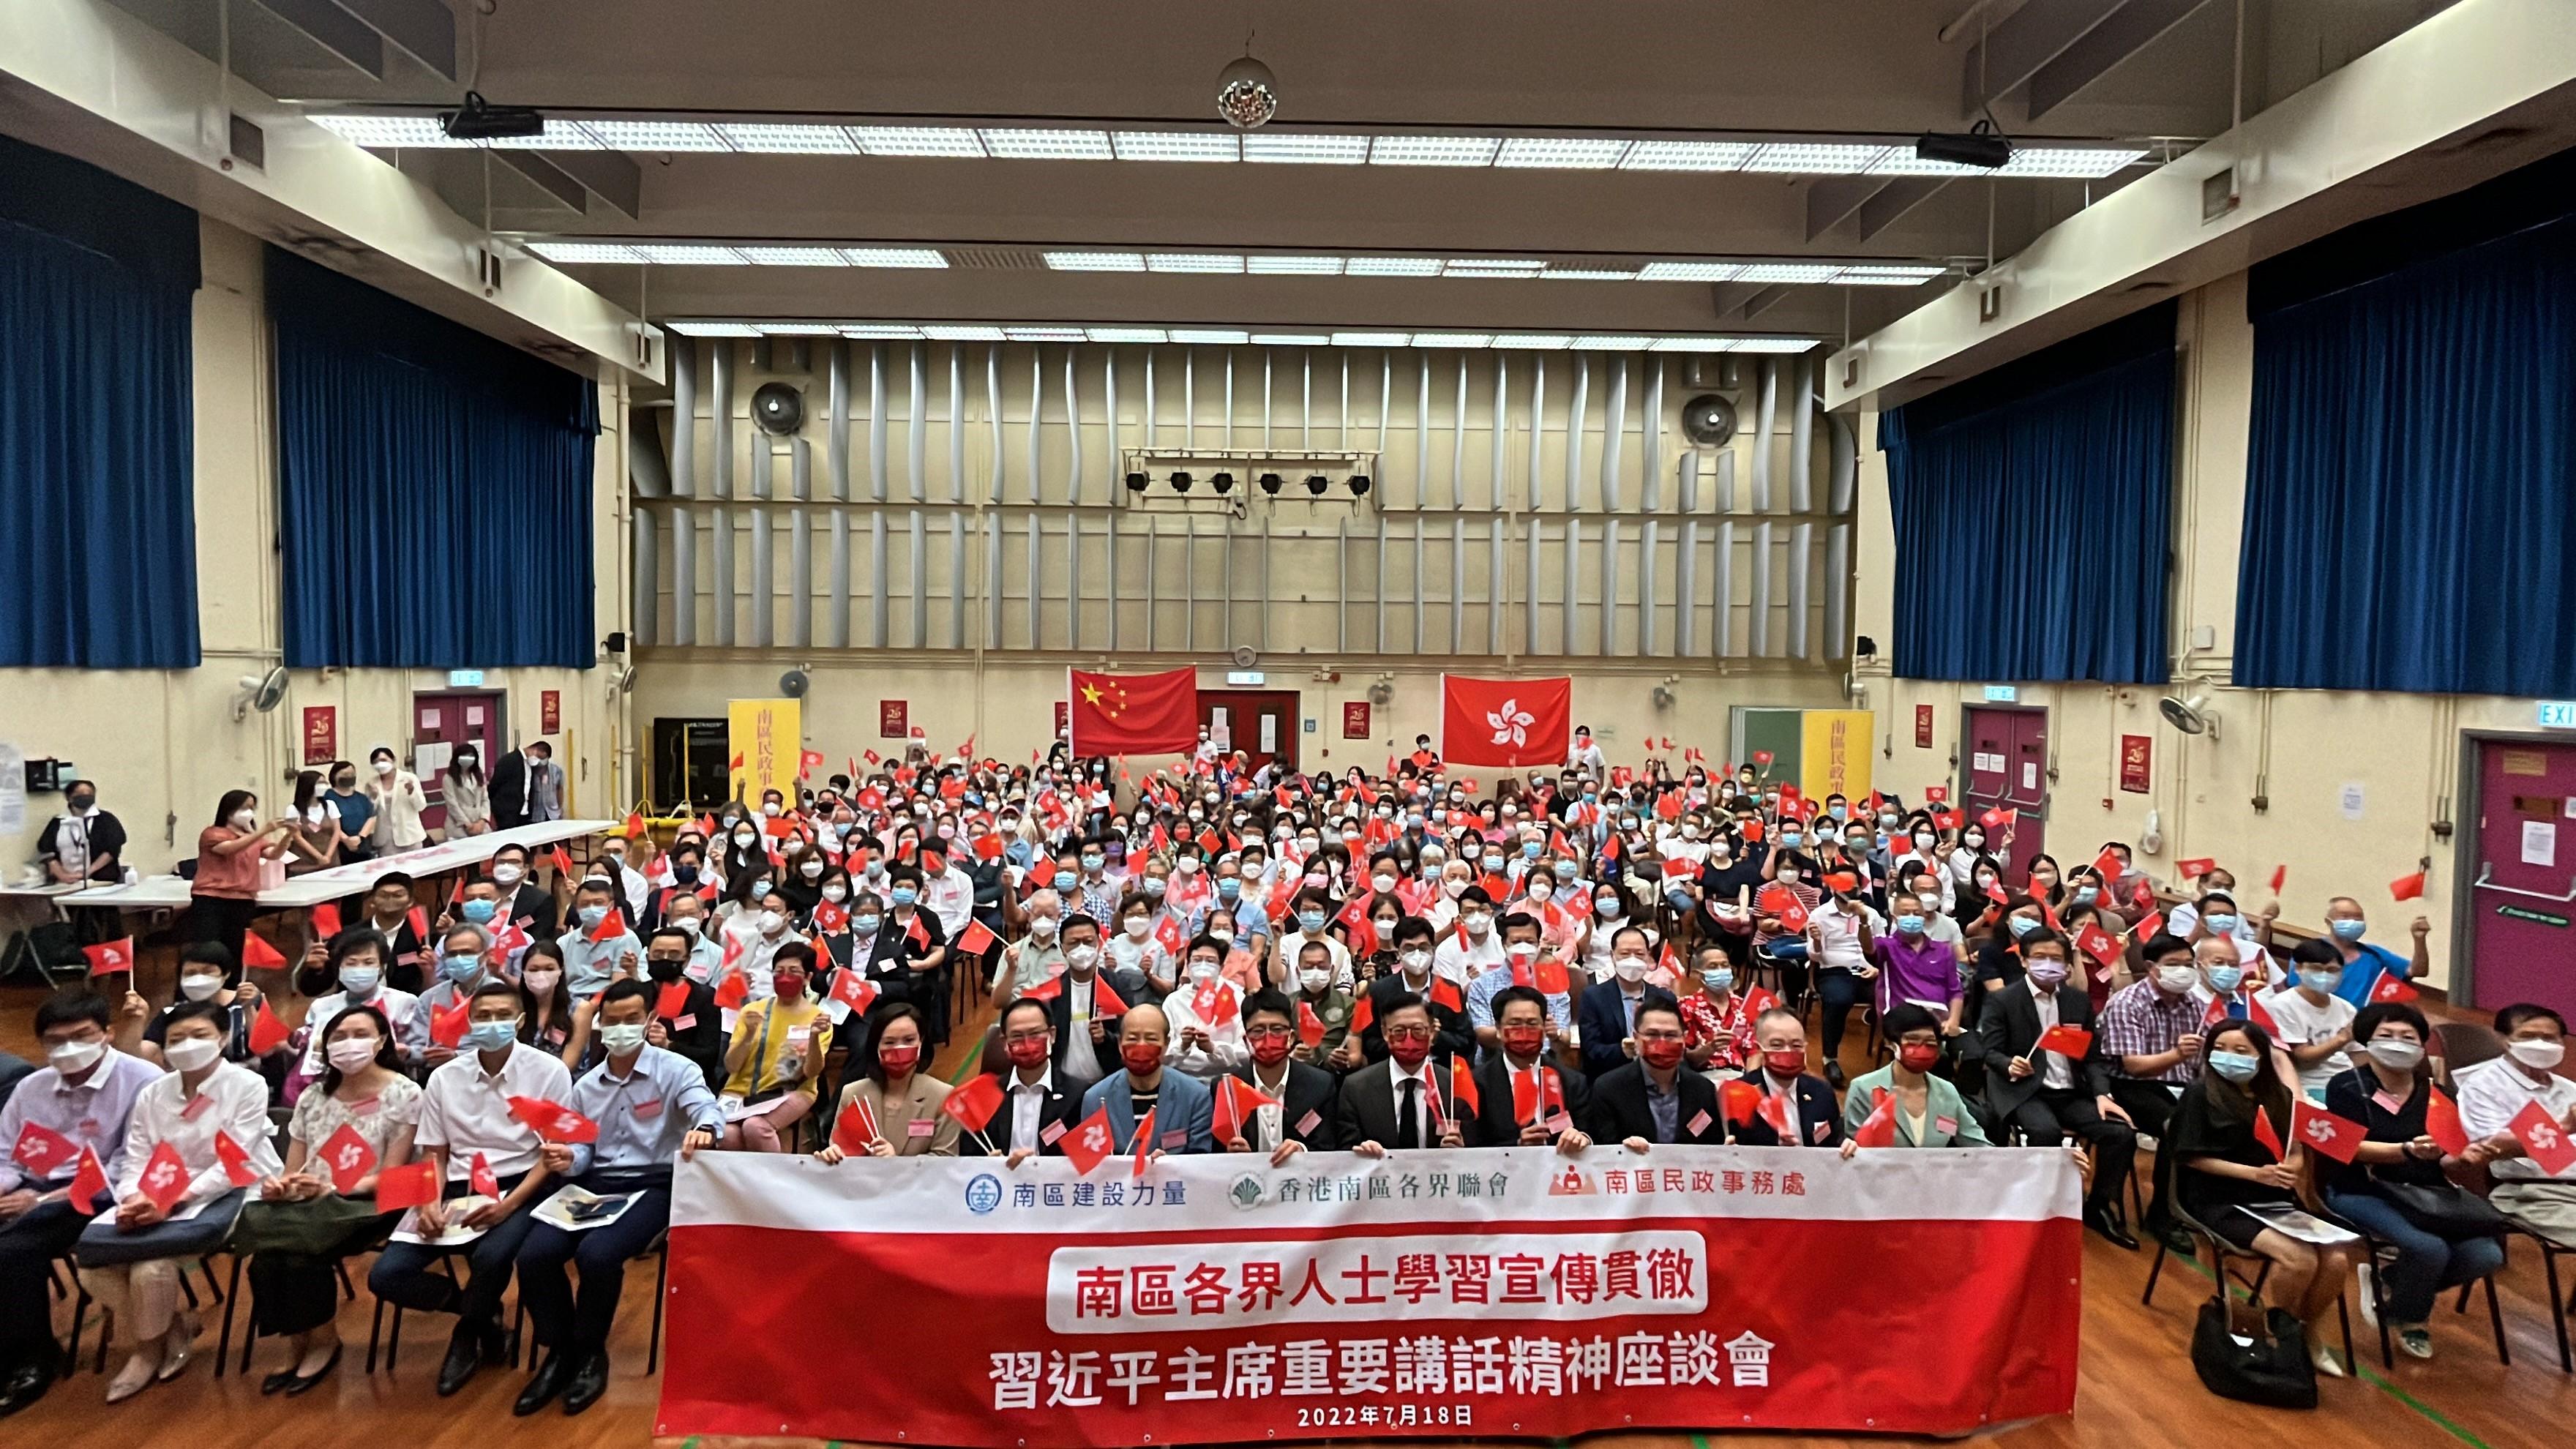 The Southern District Office, the Hong Kong Southern District Community Association, and the Southern District Constructive Power today (July 18) jointly held the "Session to Learn About, Promote and Implement the Spirit of President Xi's Important Speech" at Wah Kwai Community Hall. Photo shows guests and participants taking a group photo at the session.